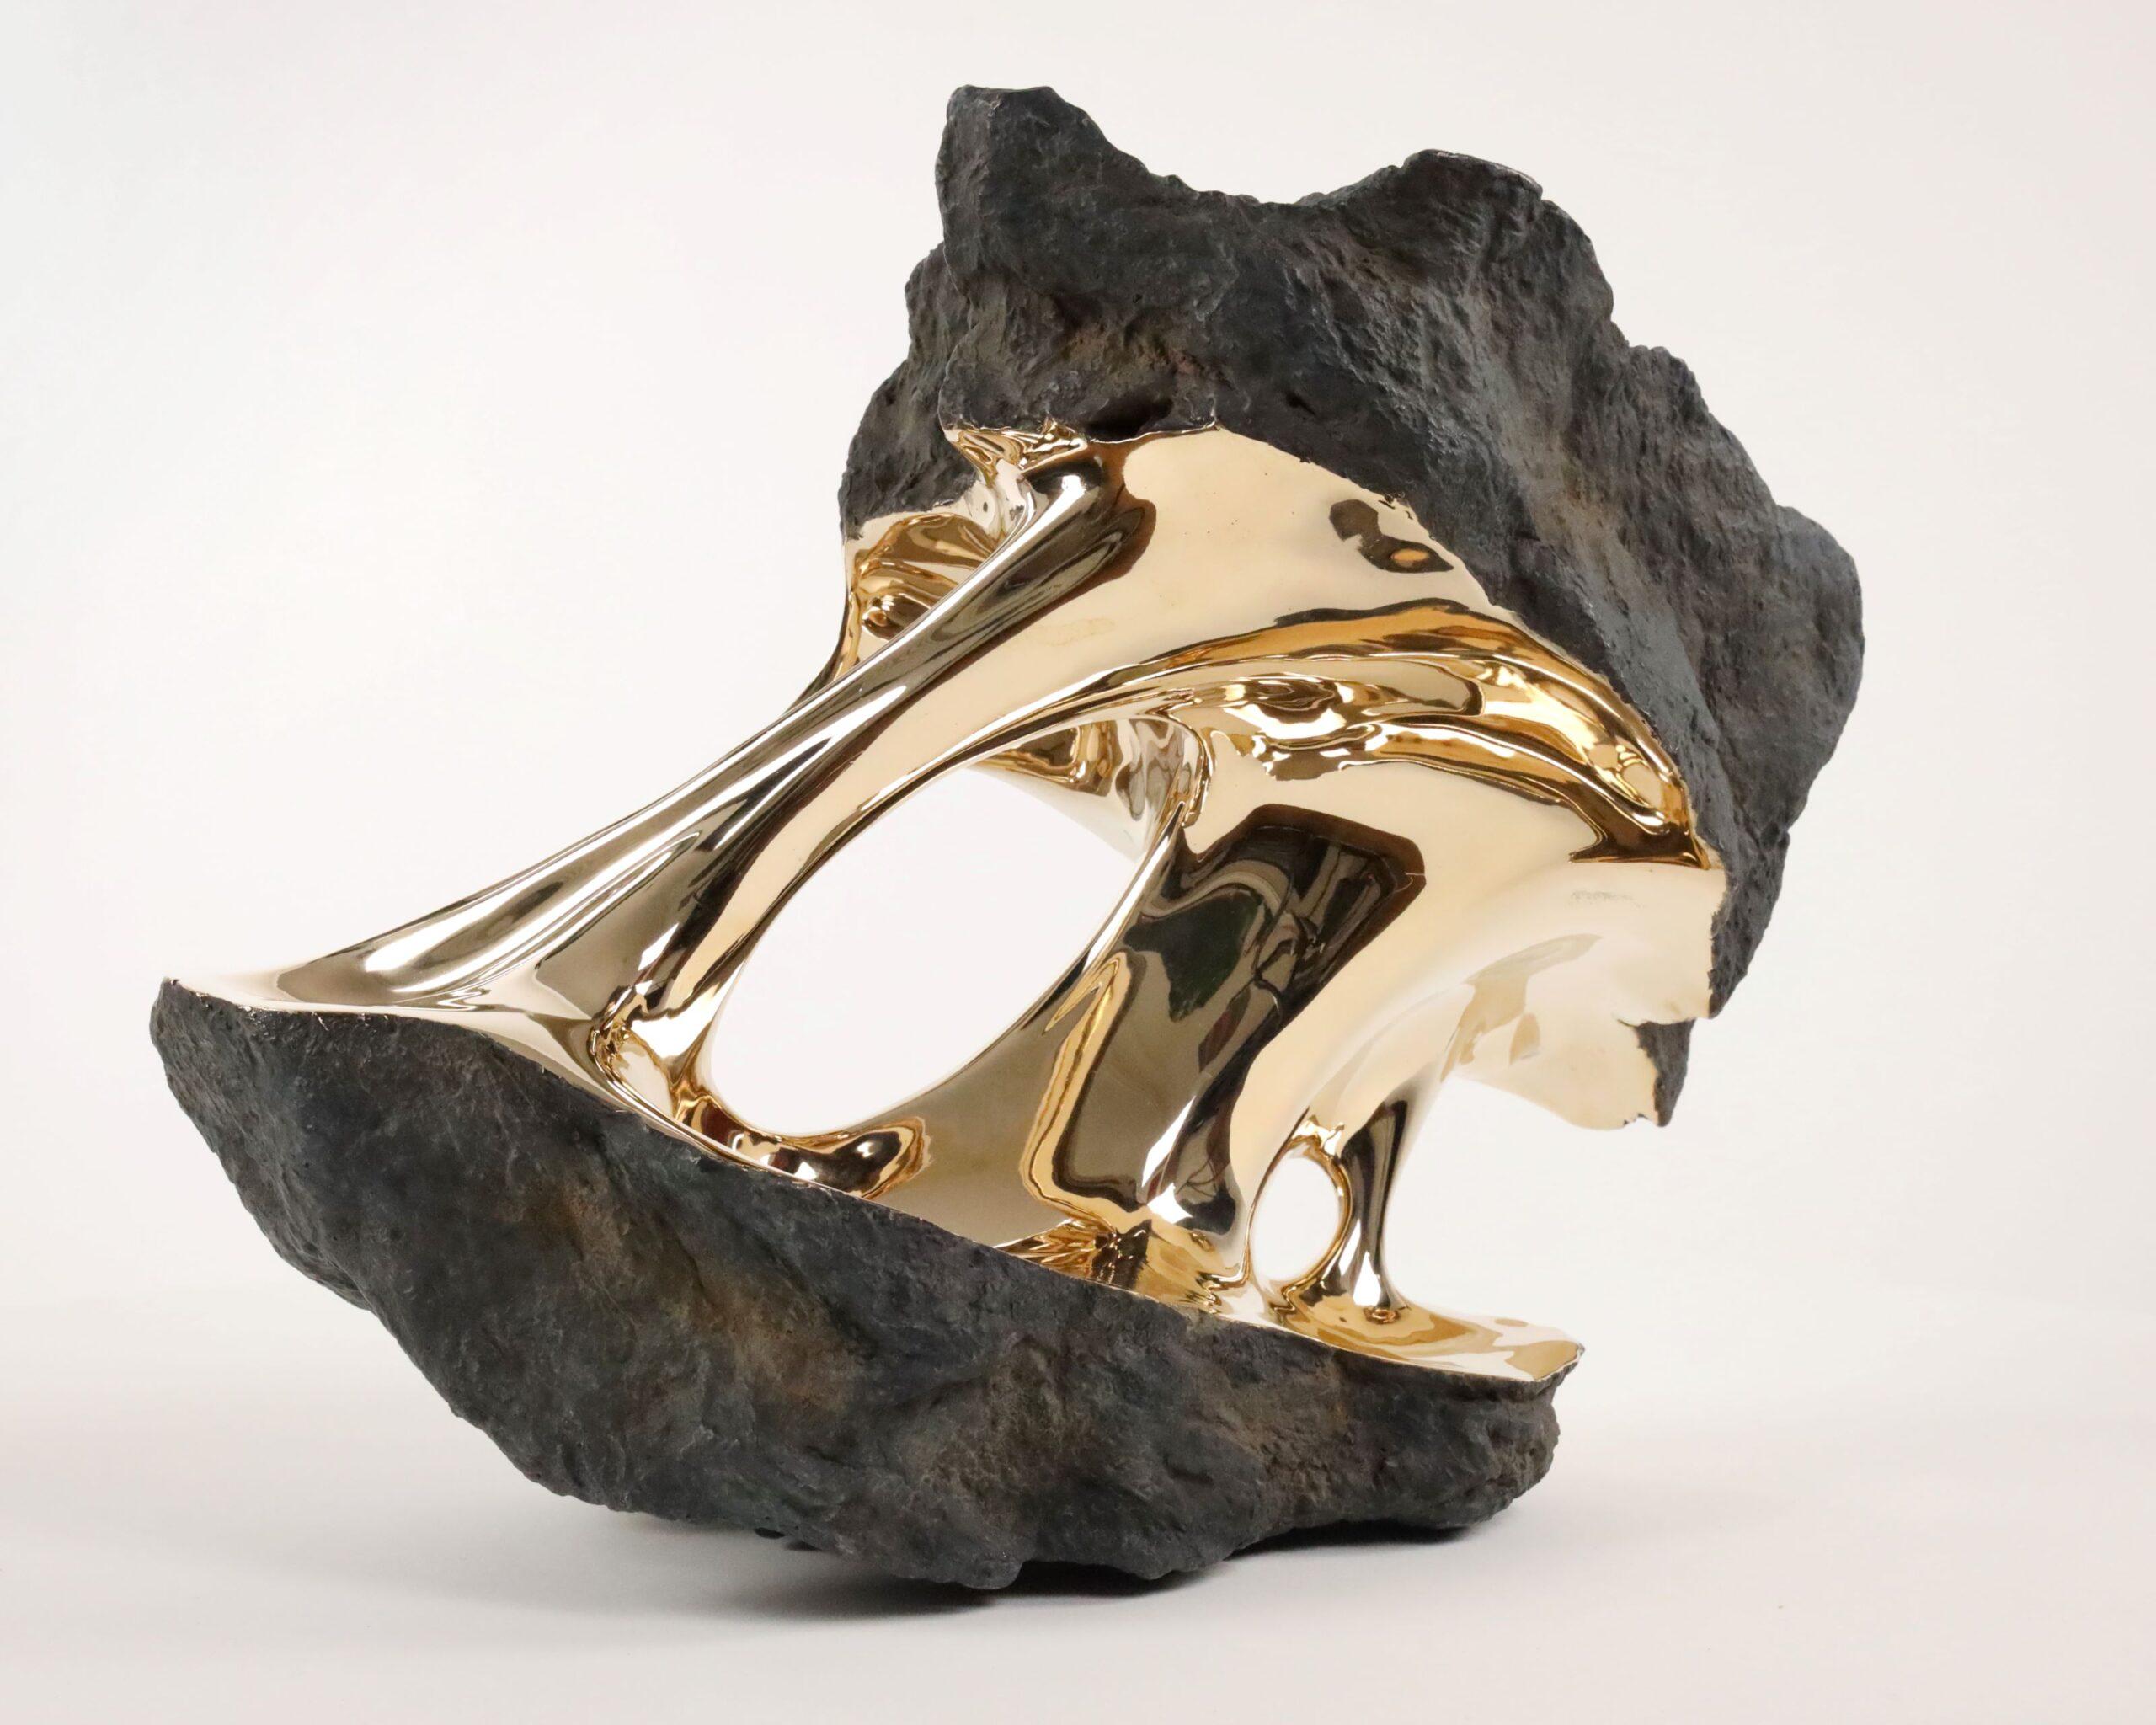 Alchemy by Romain Langlois - Rock-like bronze sculpture, golden, abstract For Sale 4